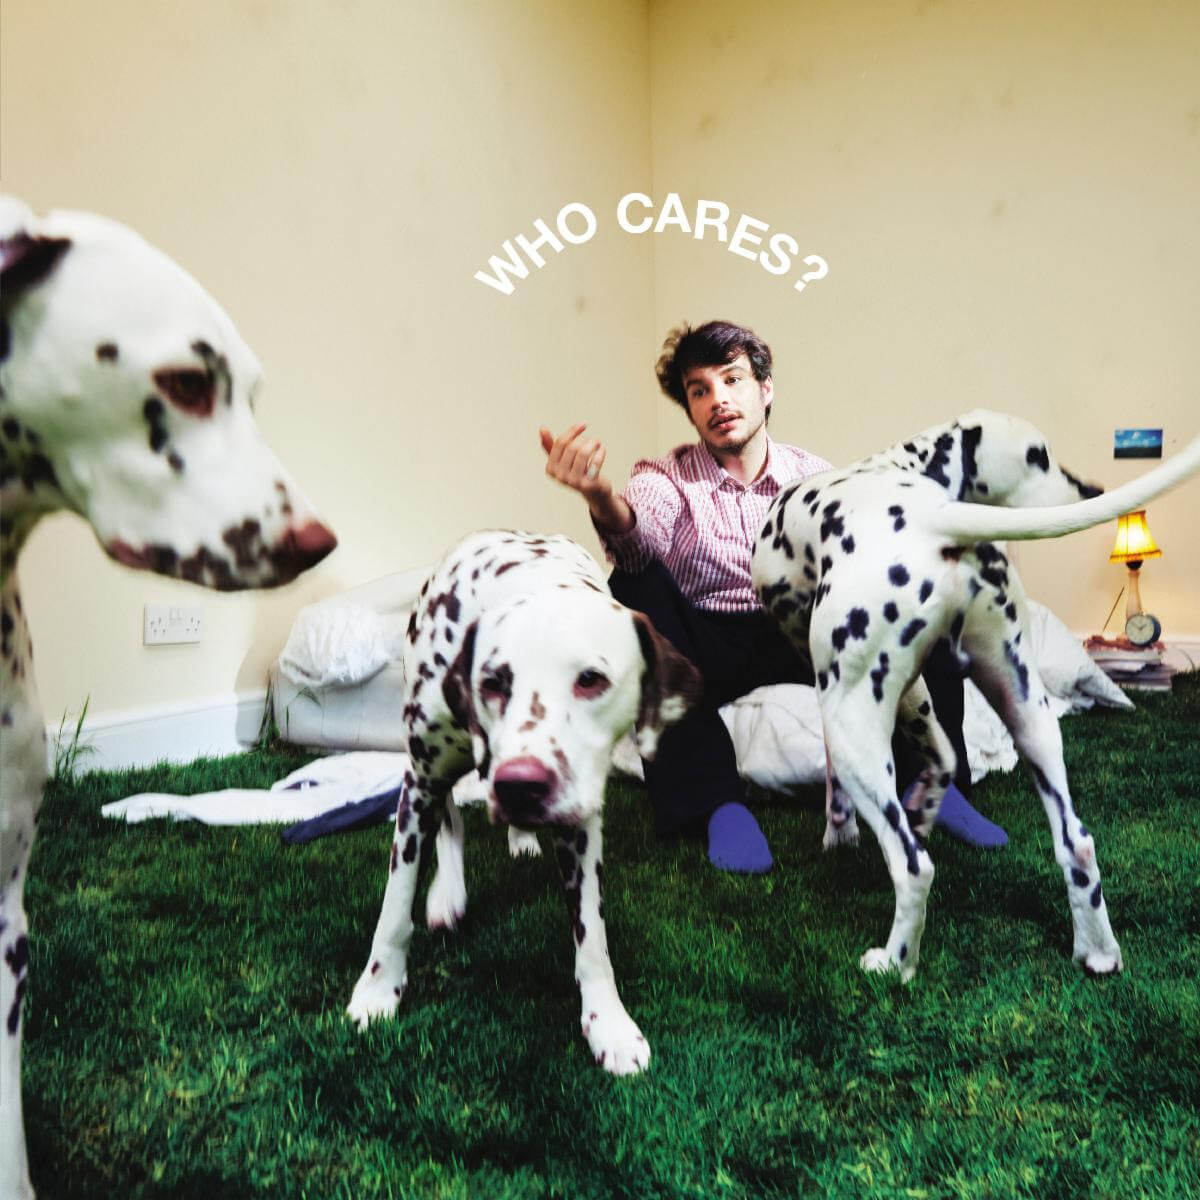 Rex Orange County has shared a new video for "One In A Million," a track off his current release Who Cares? now available via DSPs